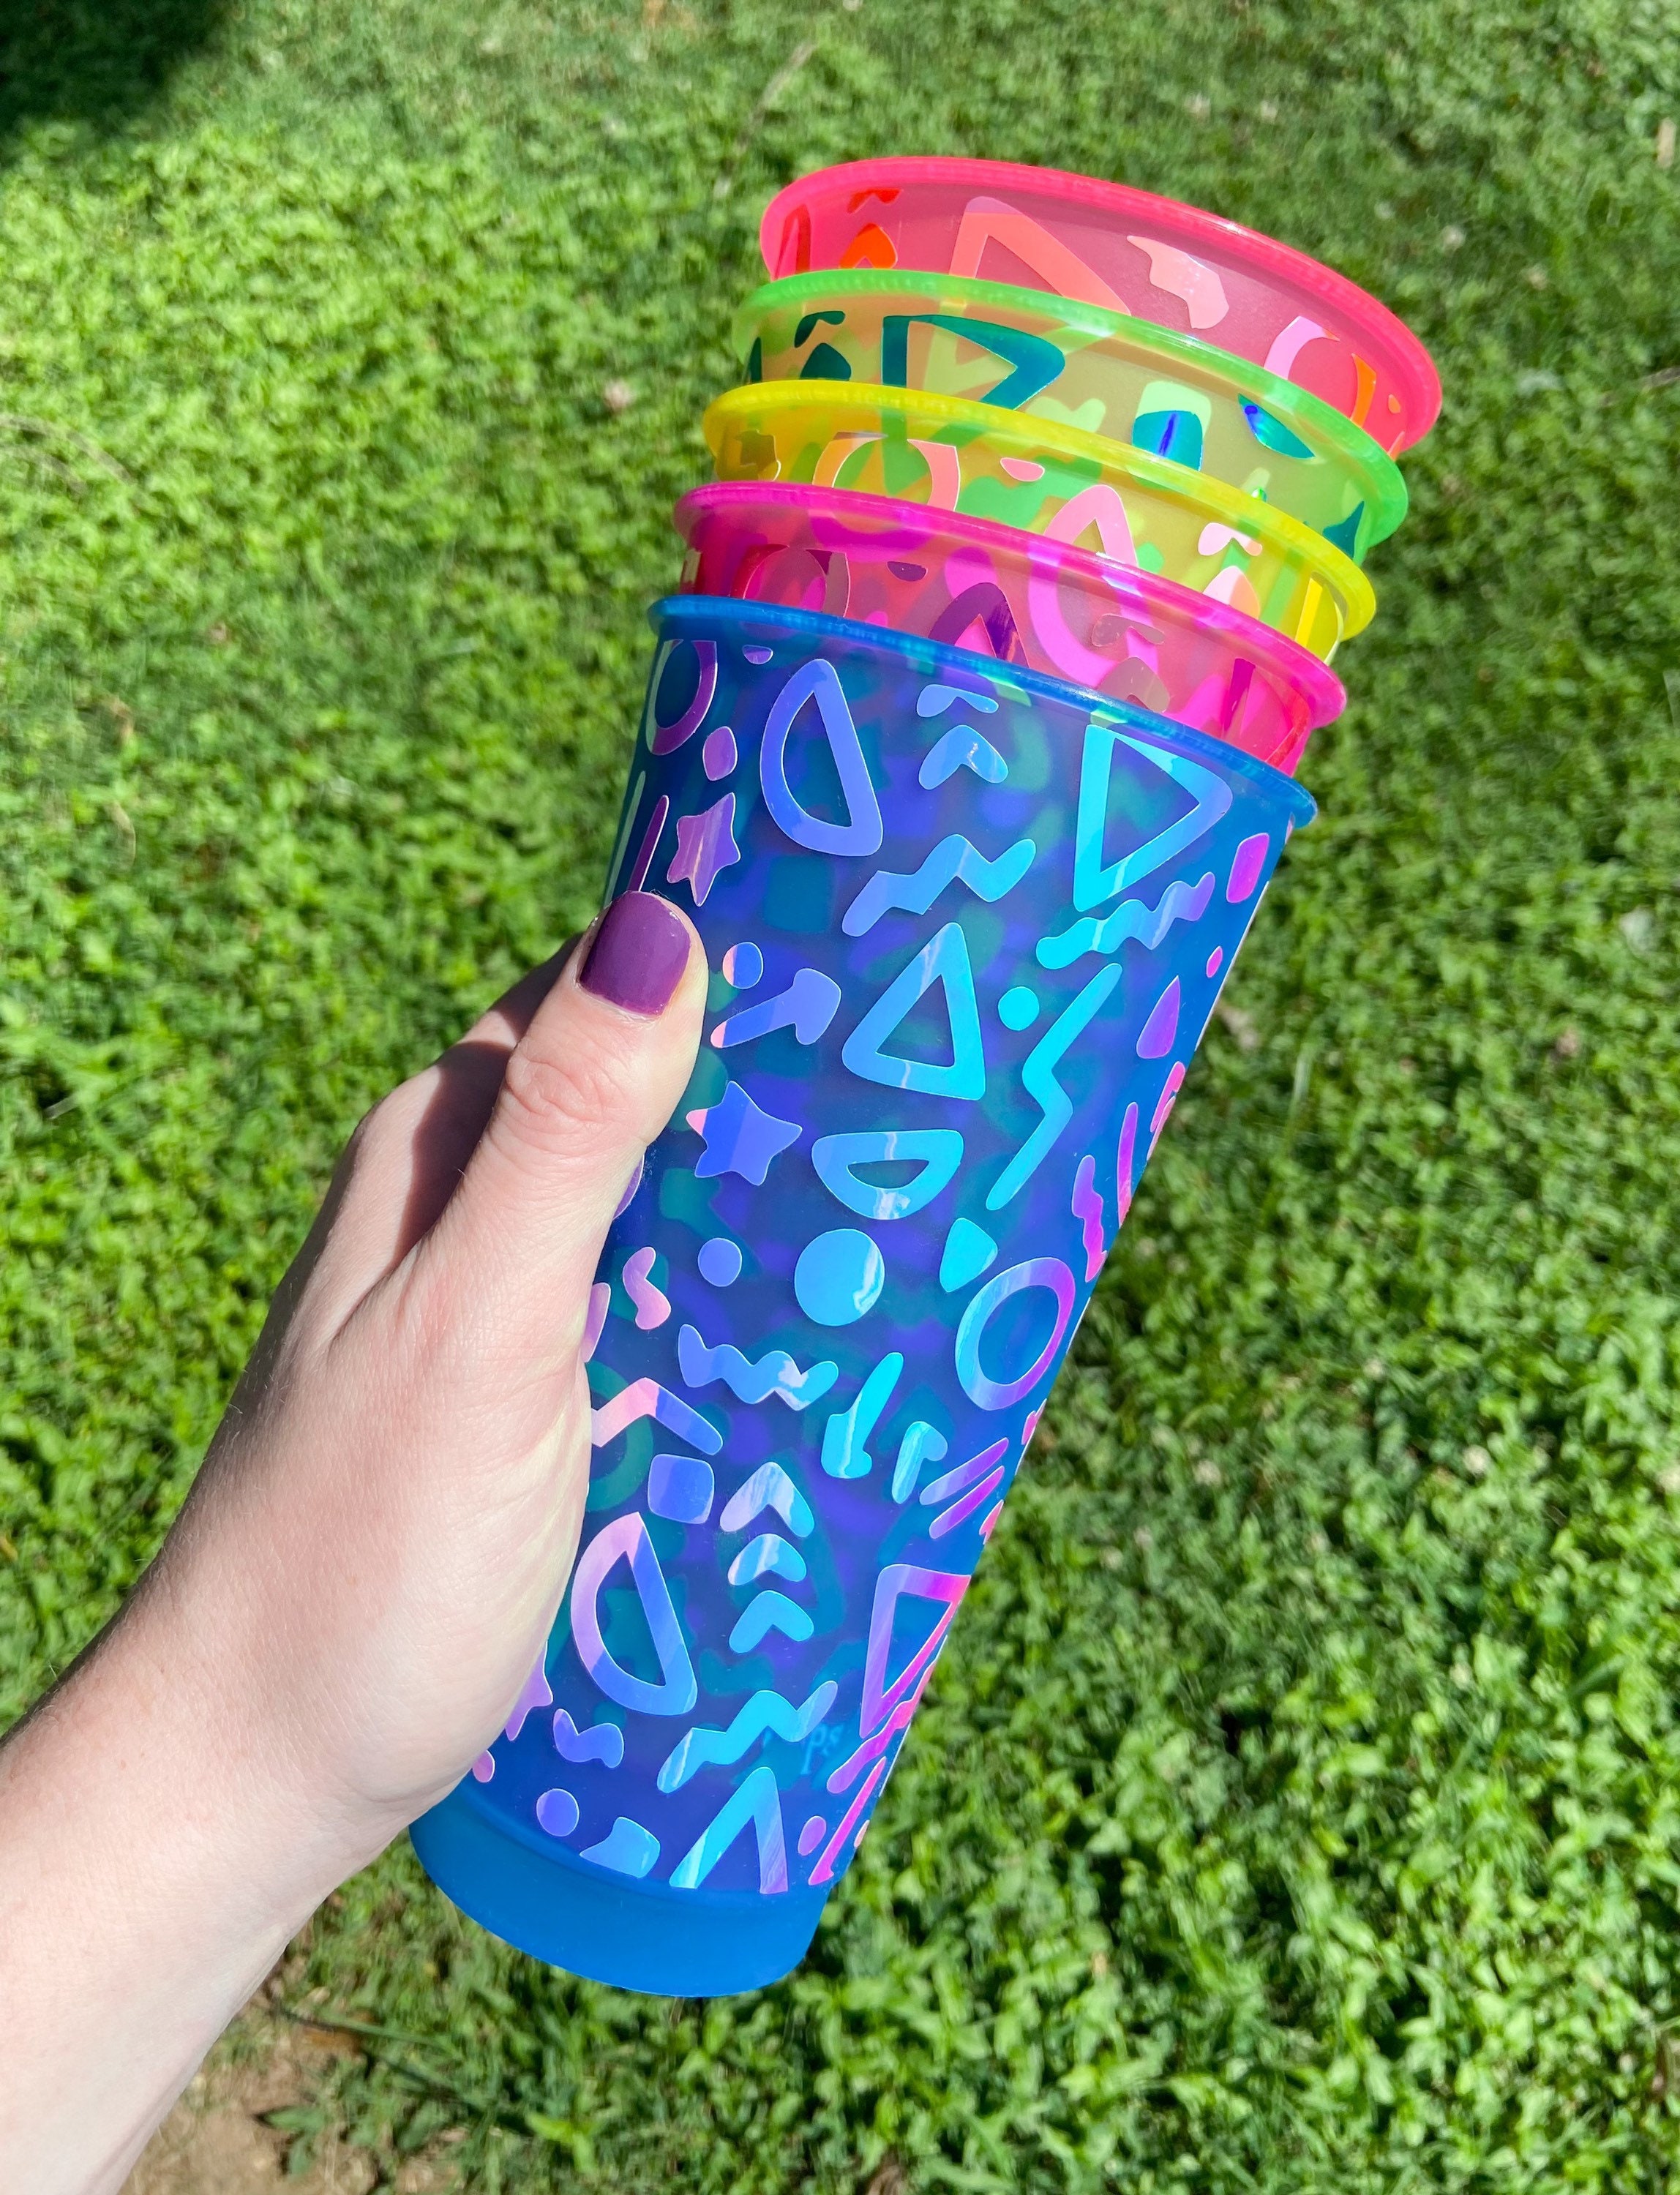 Tal Color Changing Cups - Walmart Finds